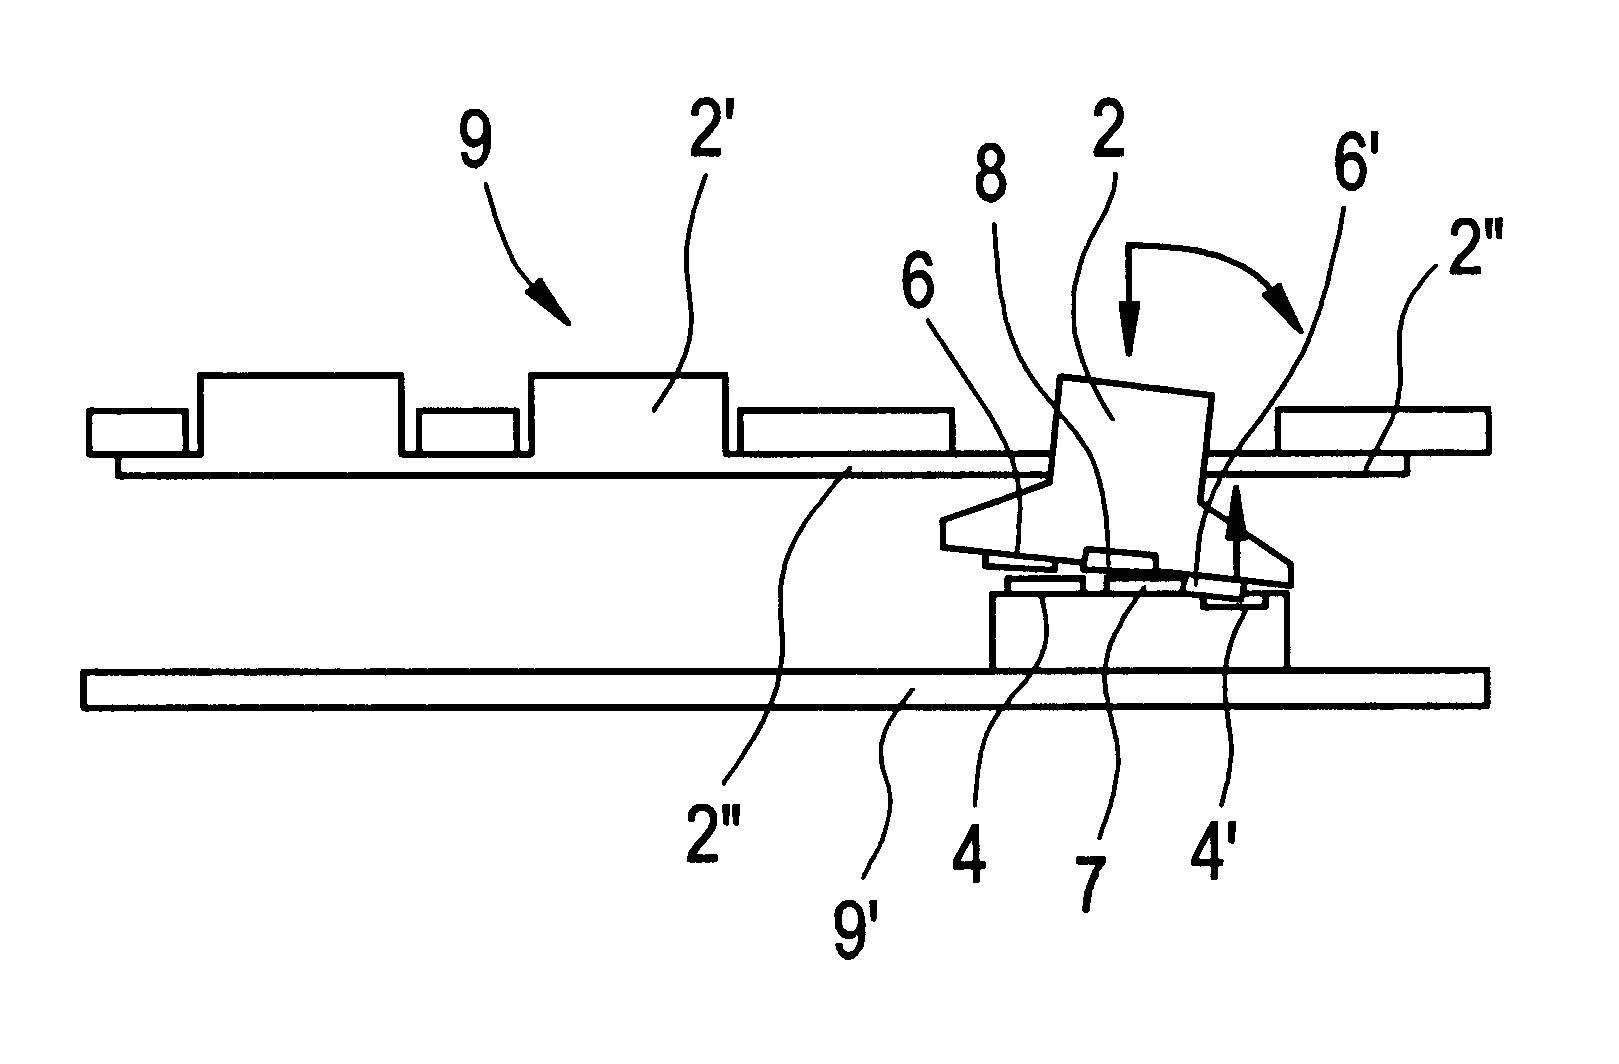 Keyboard switch assembly including actuator member with three active positions